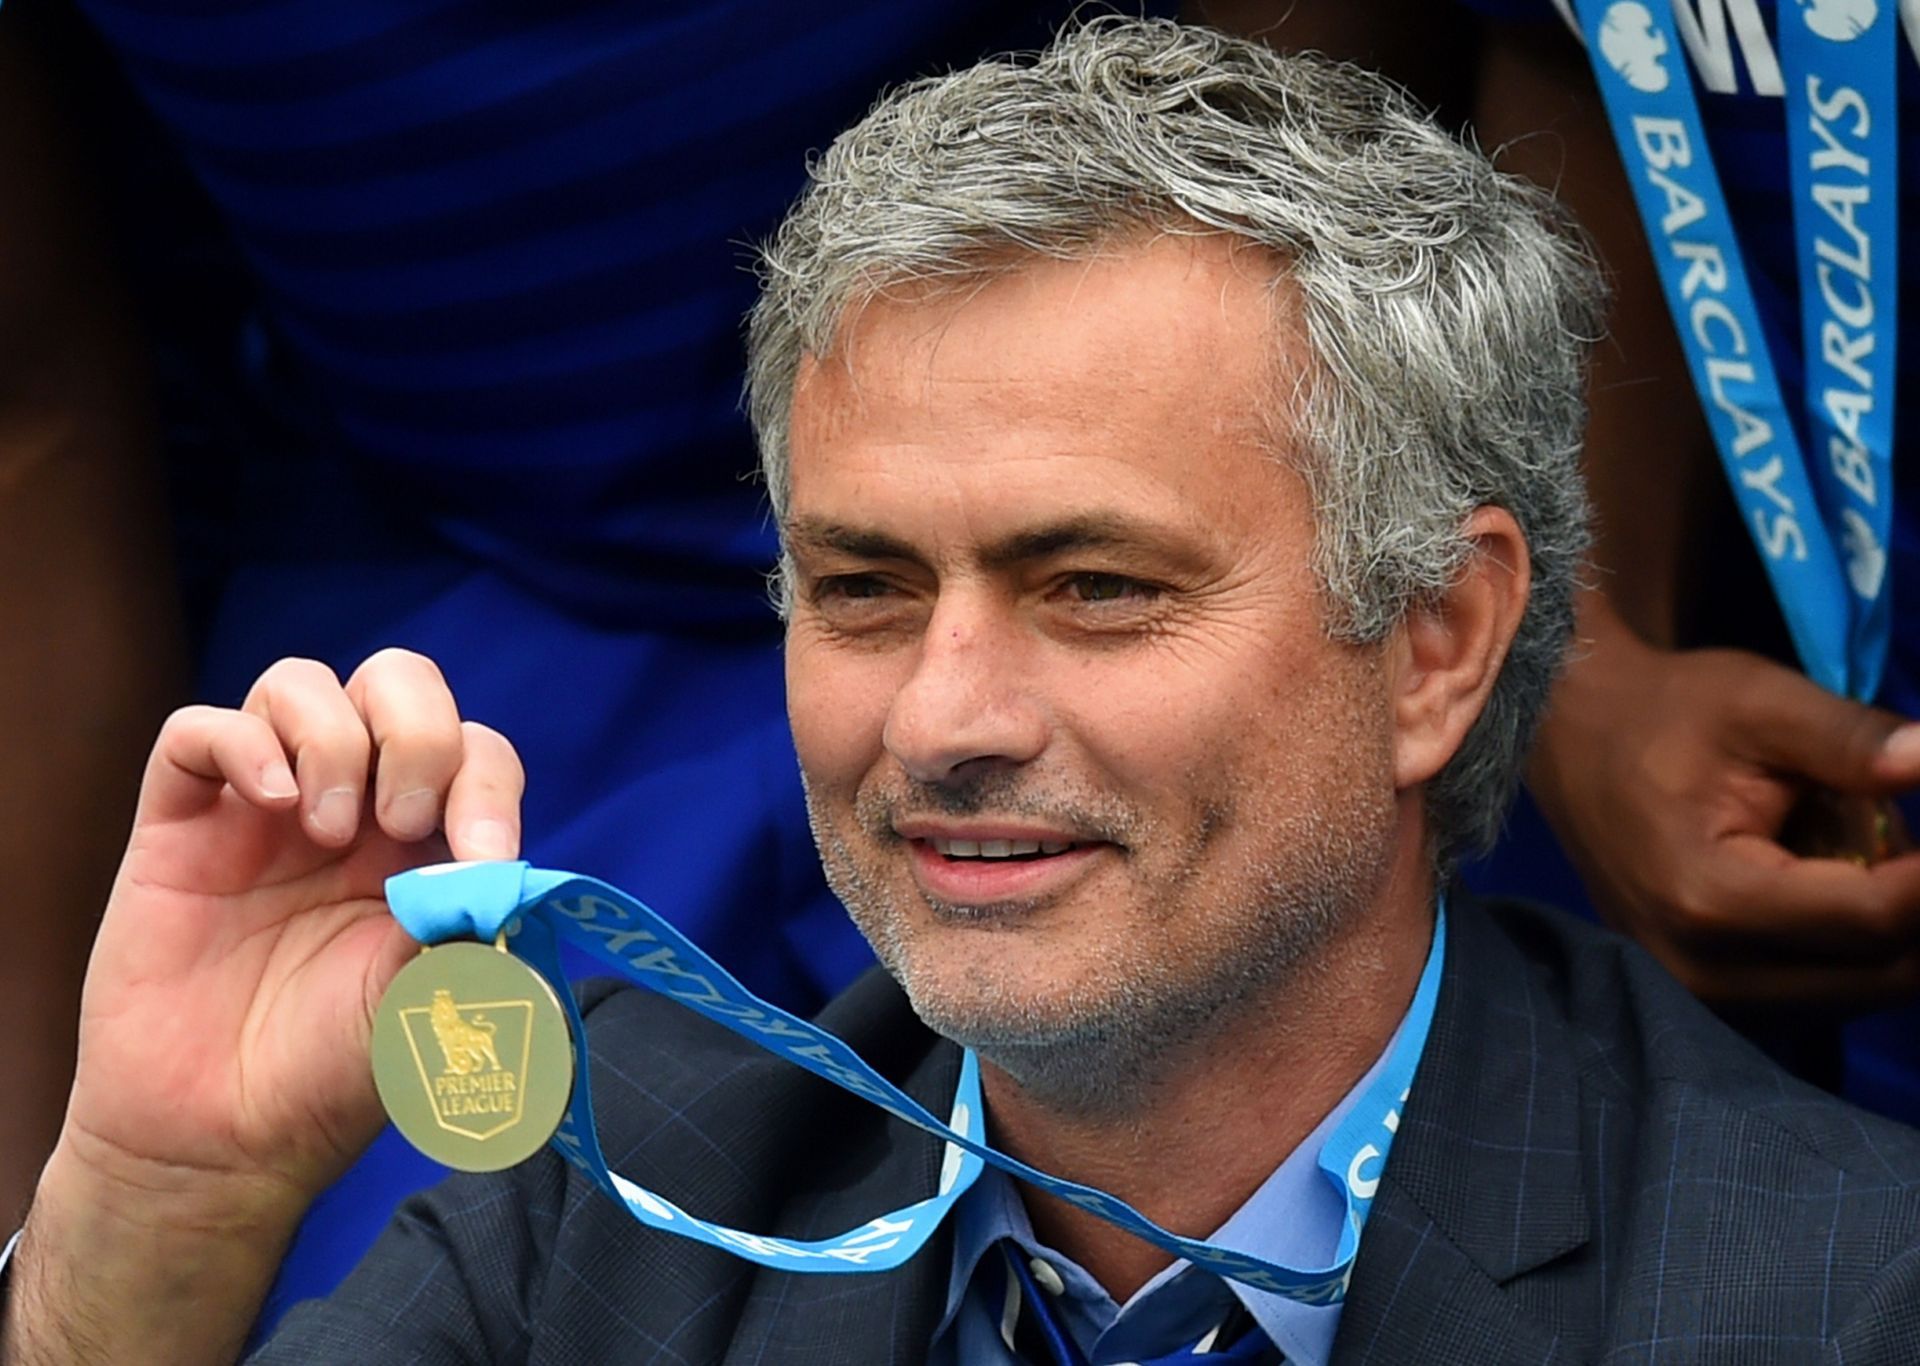 Mourinho is one of the best football managers in the world